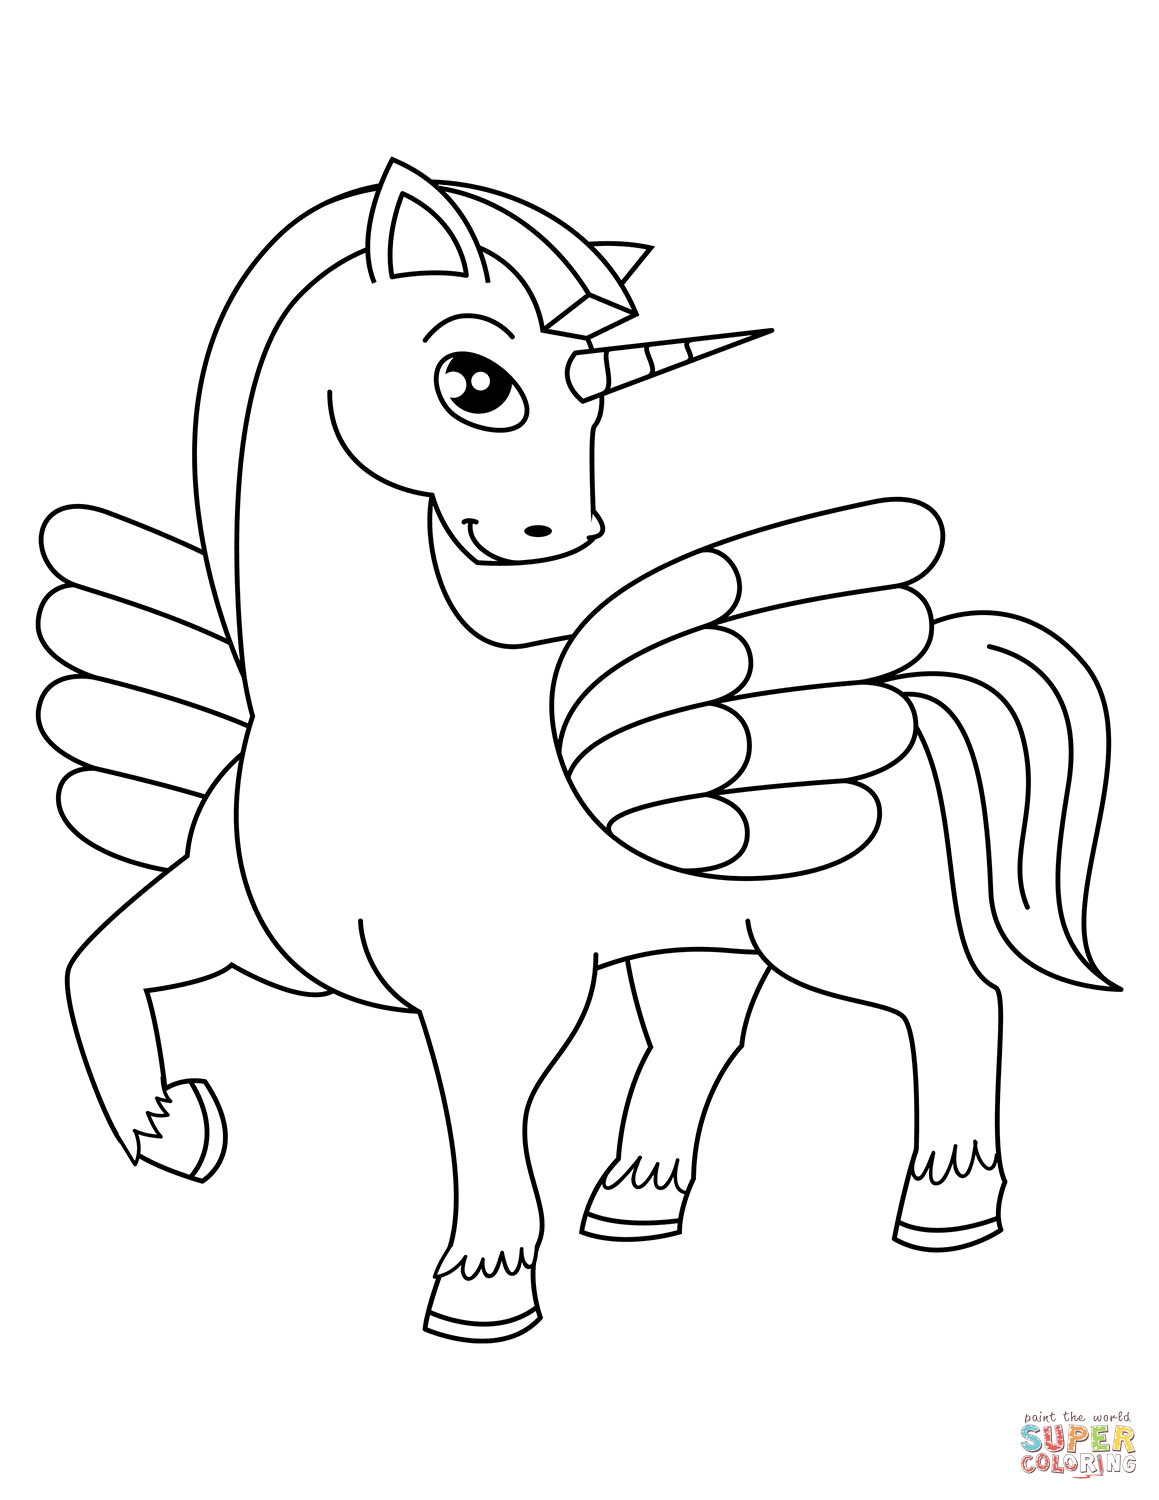 Coloring Pages For Girls Unicorns
 Cute Winged Unicorn coloring page